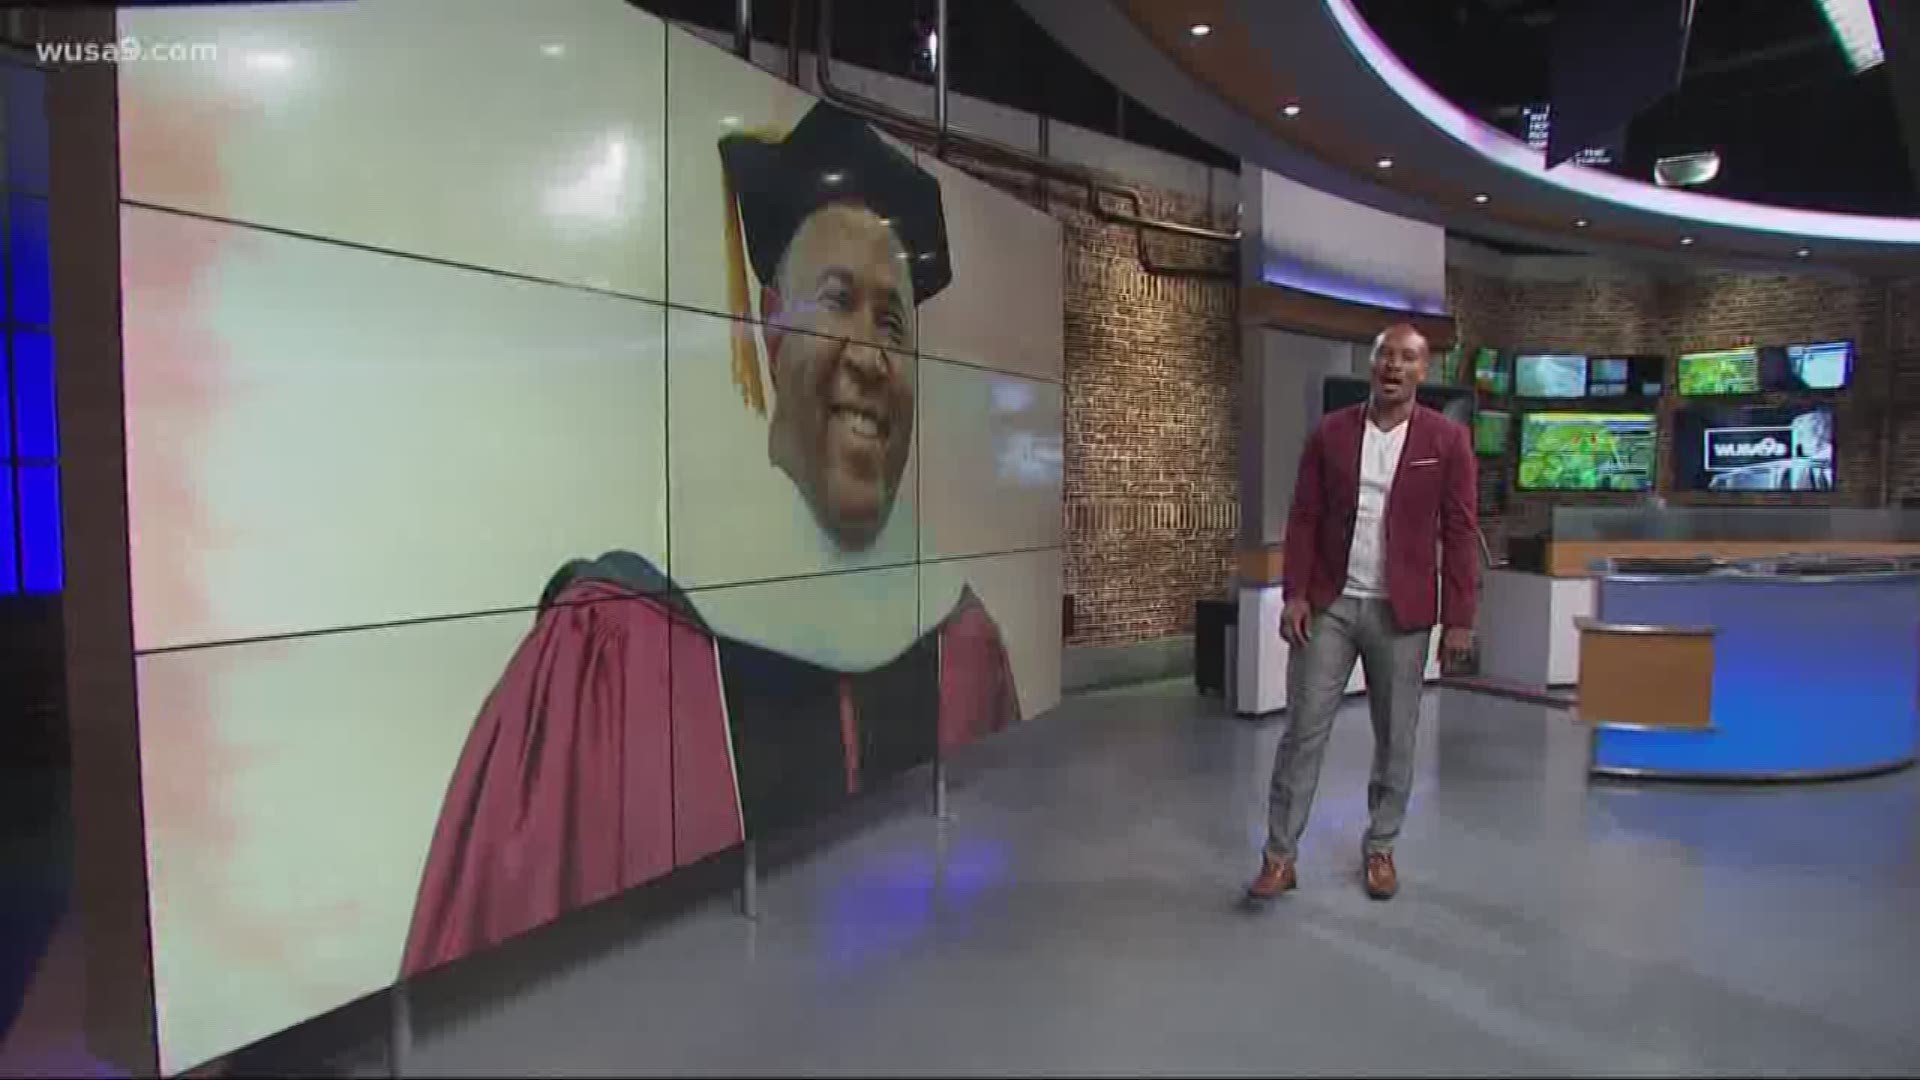 WUSA9's Darren Haynes gives his take on Morehouse College's commencement speaker who says he will pay off student loans.